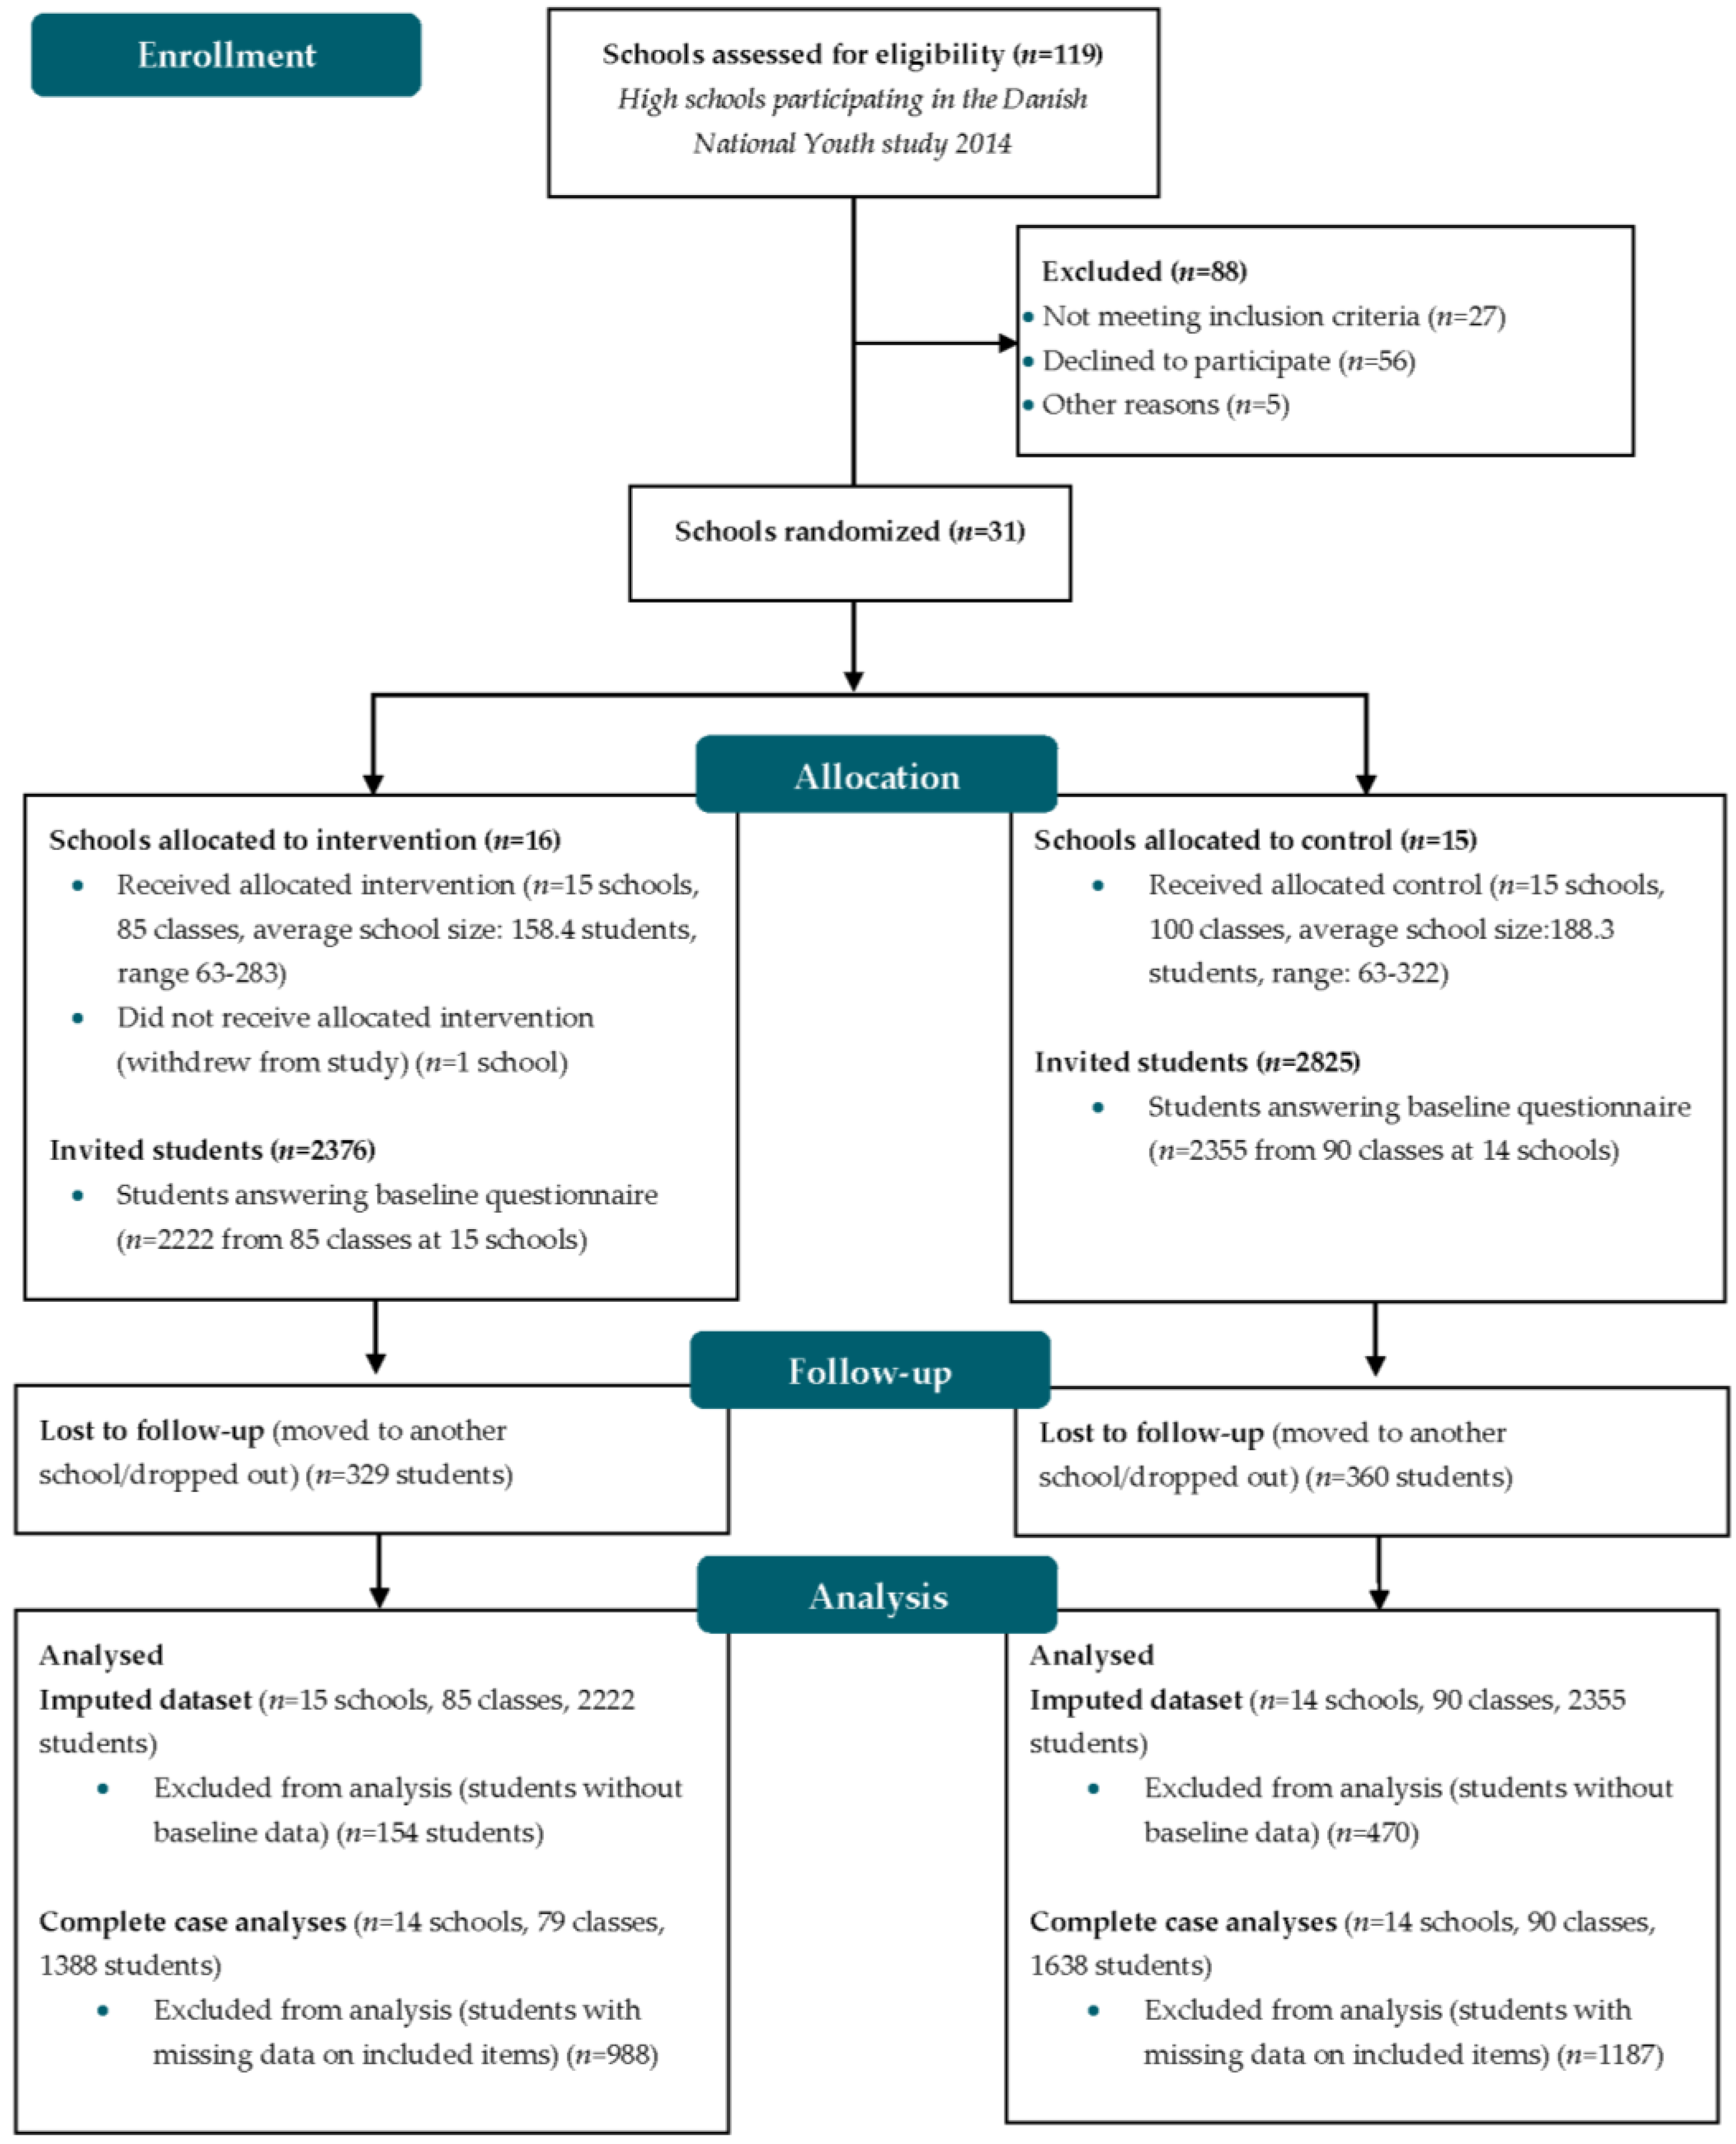 IJERPH | Free Full-Text Preventing Stress among High School Students in Denmark through the Multicomponent Healthy High School Intervention&mdash;The Effectiveness at First Follow-Up